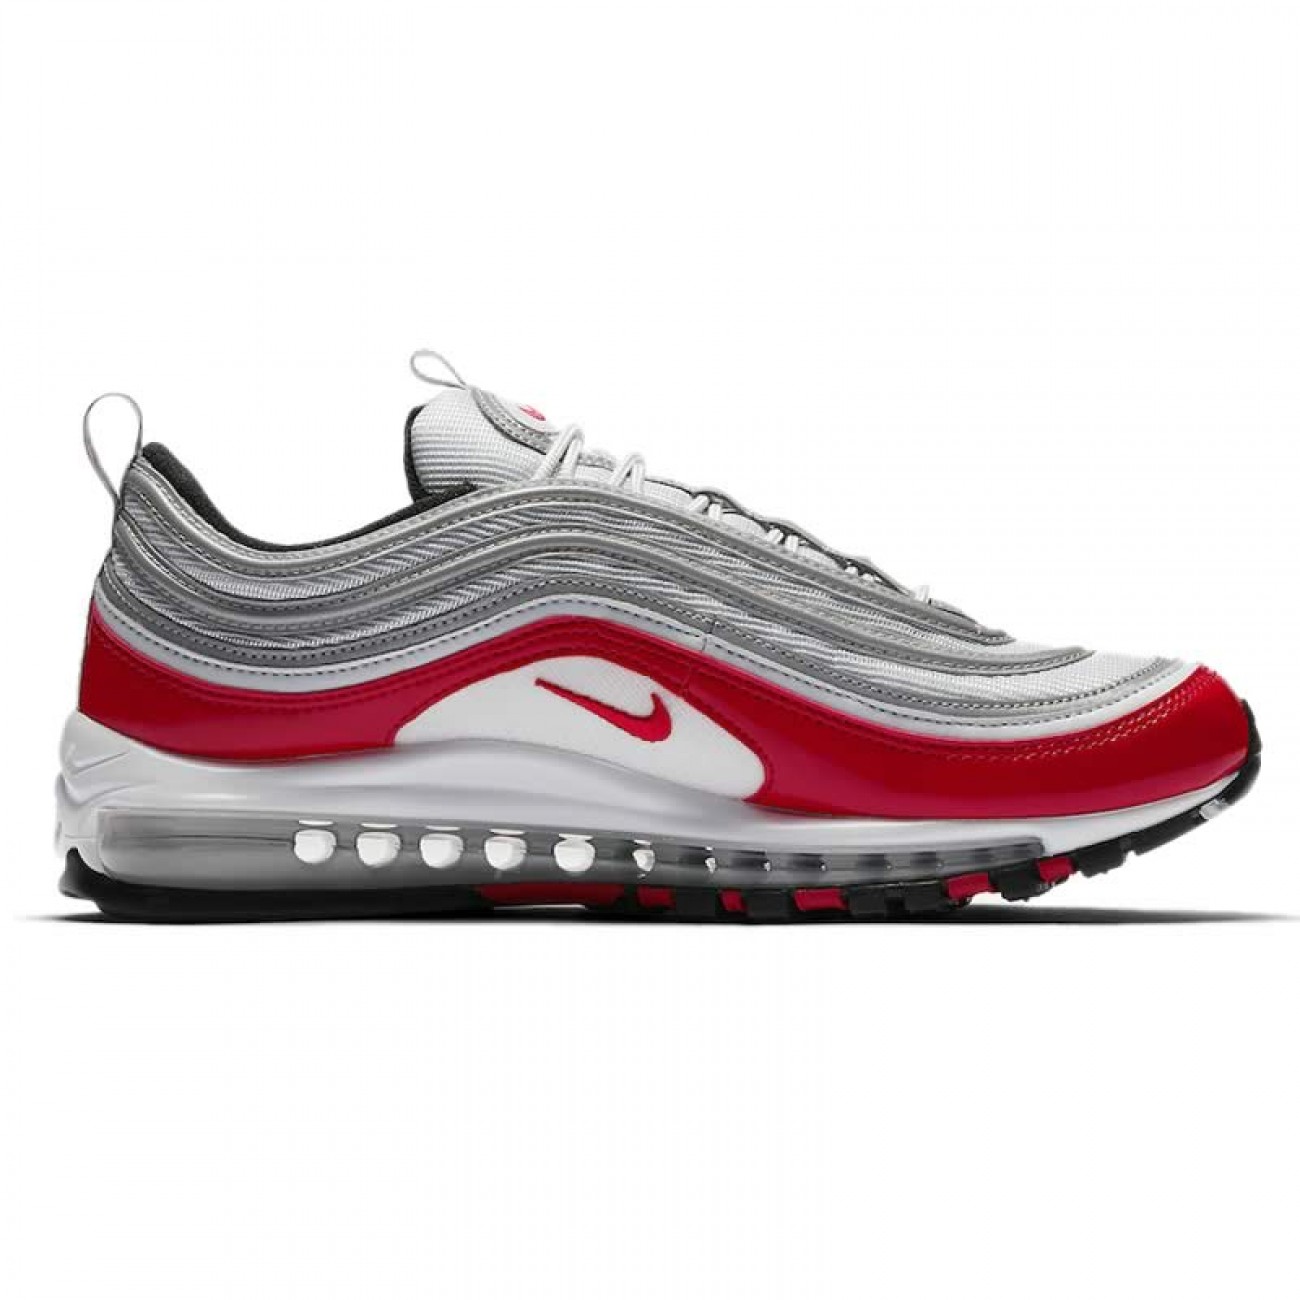 Nike Air Max 97 "University Red / Silver" Mens Womens Shoes 921826-009